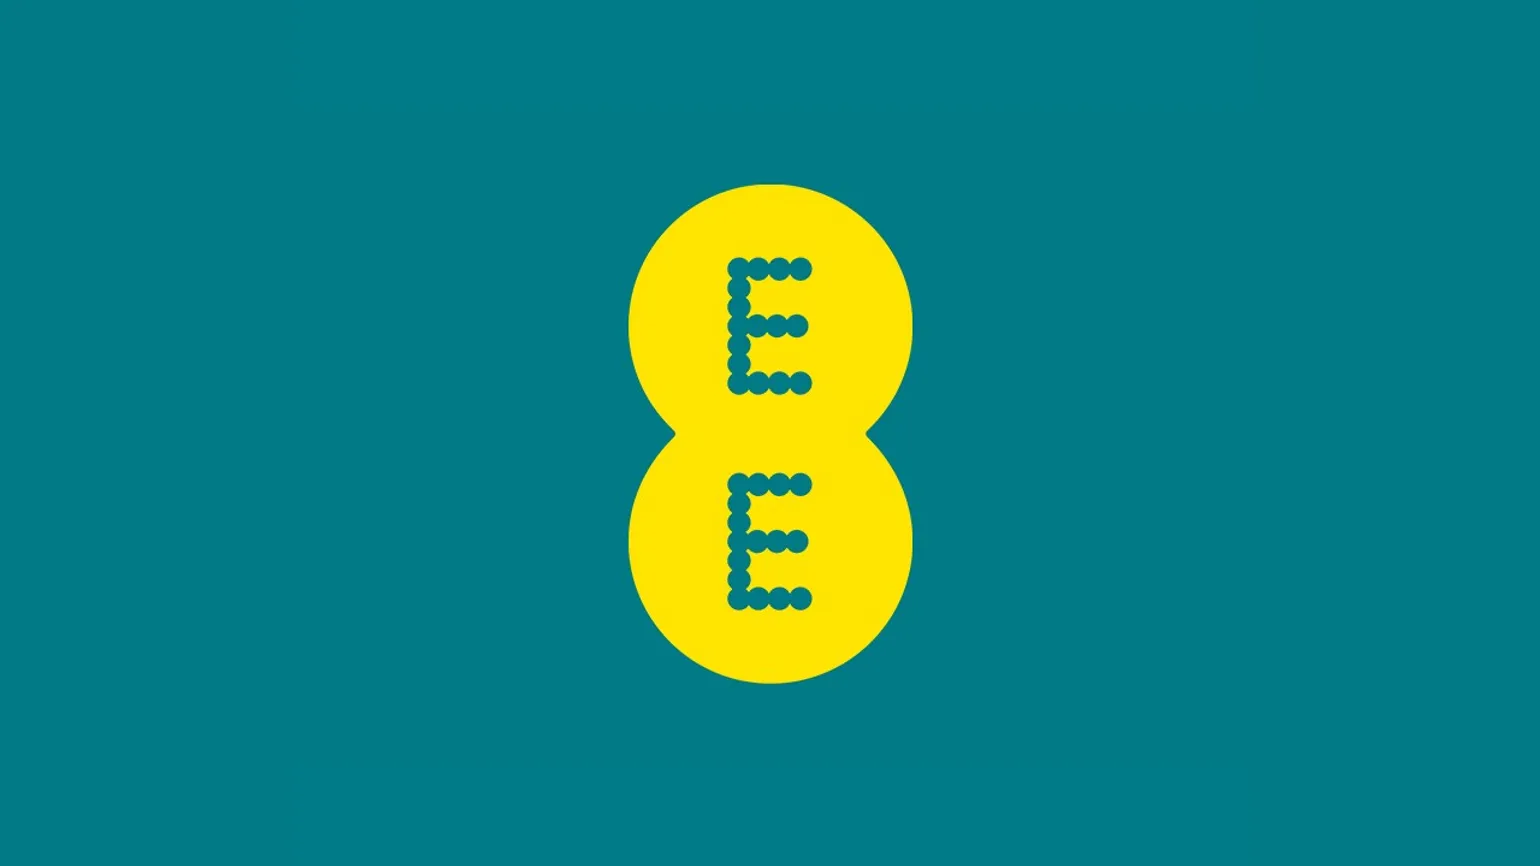 EE price increases